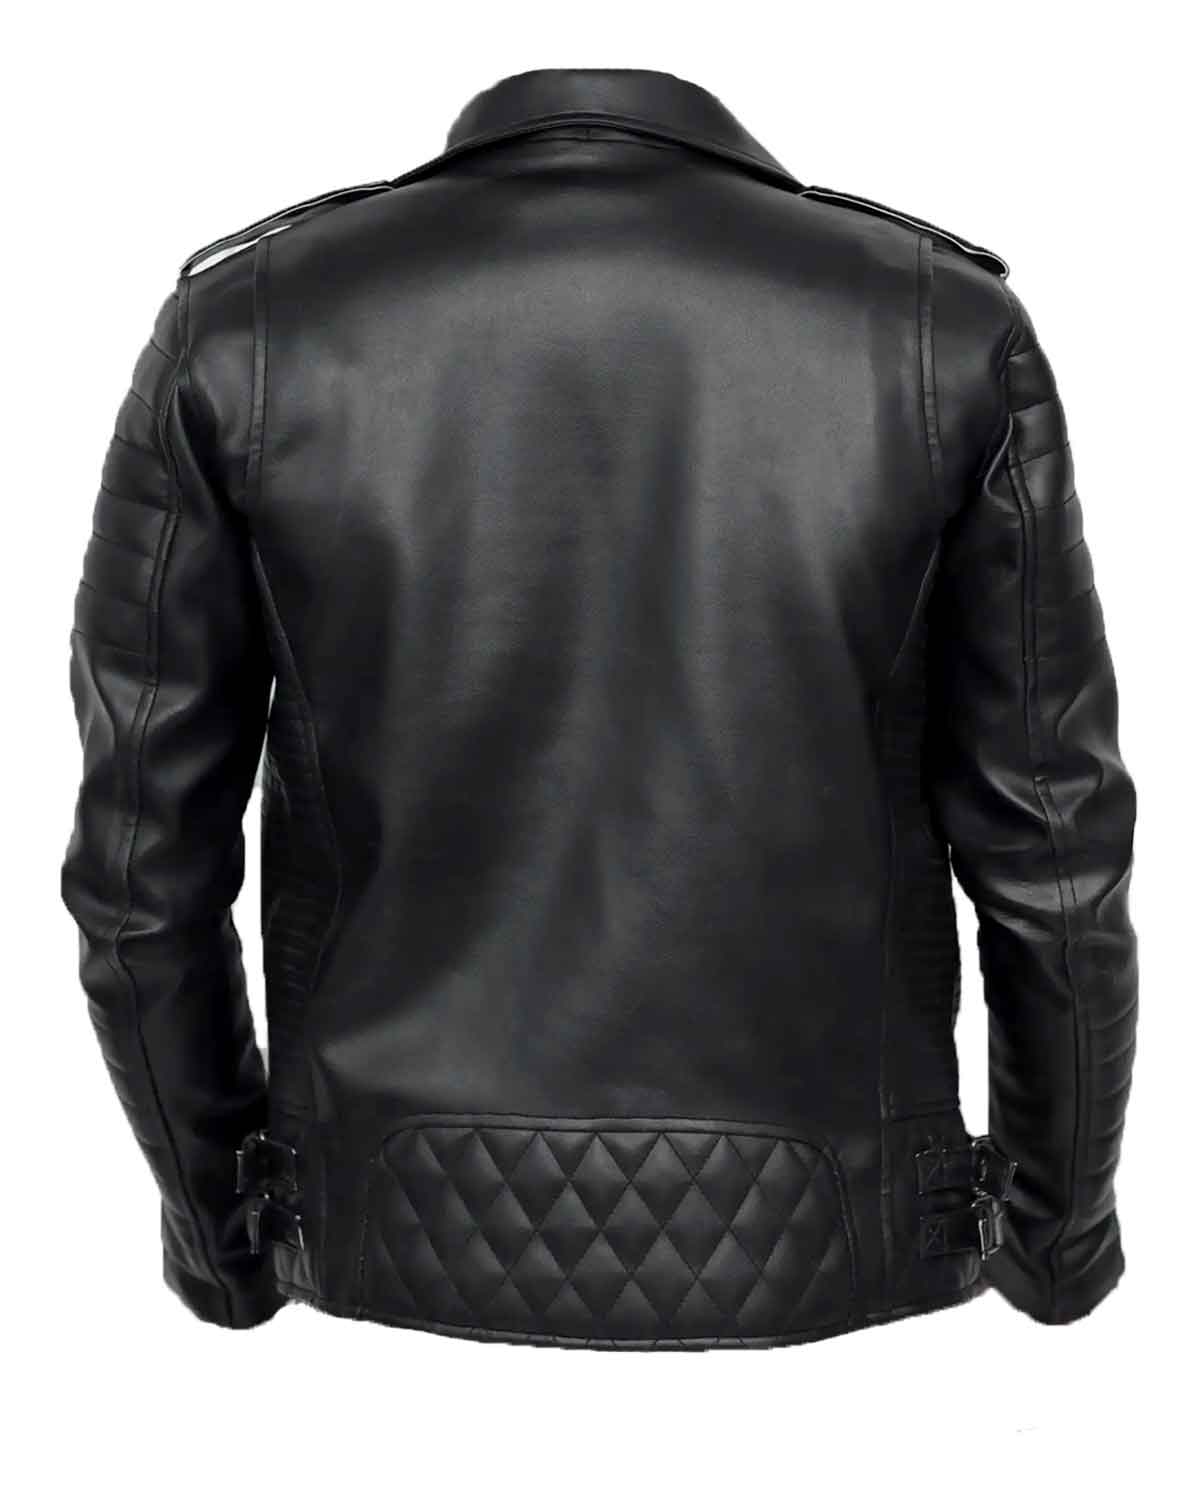 MotorCycleJackets Men’s Black Quilted Leather Jacket